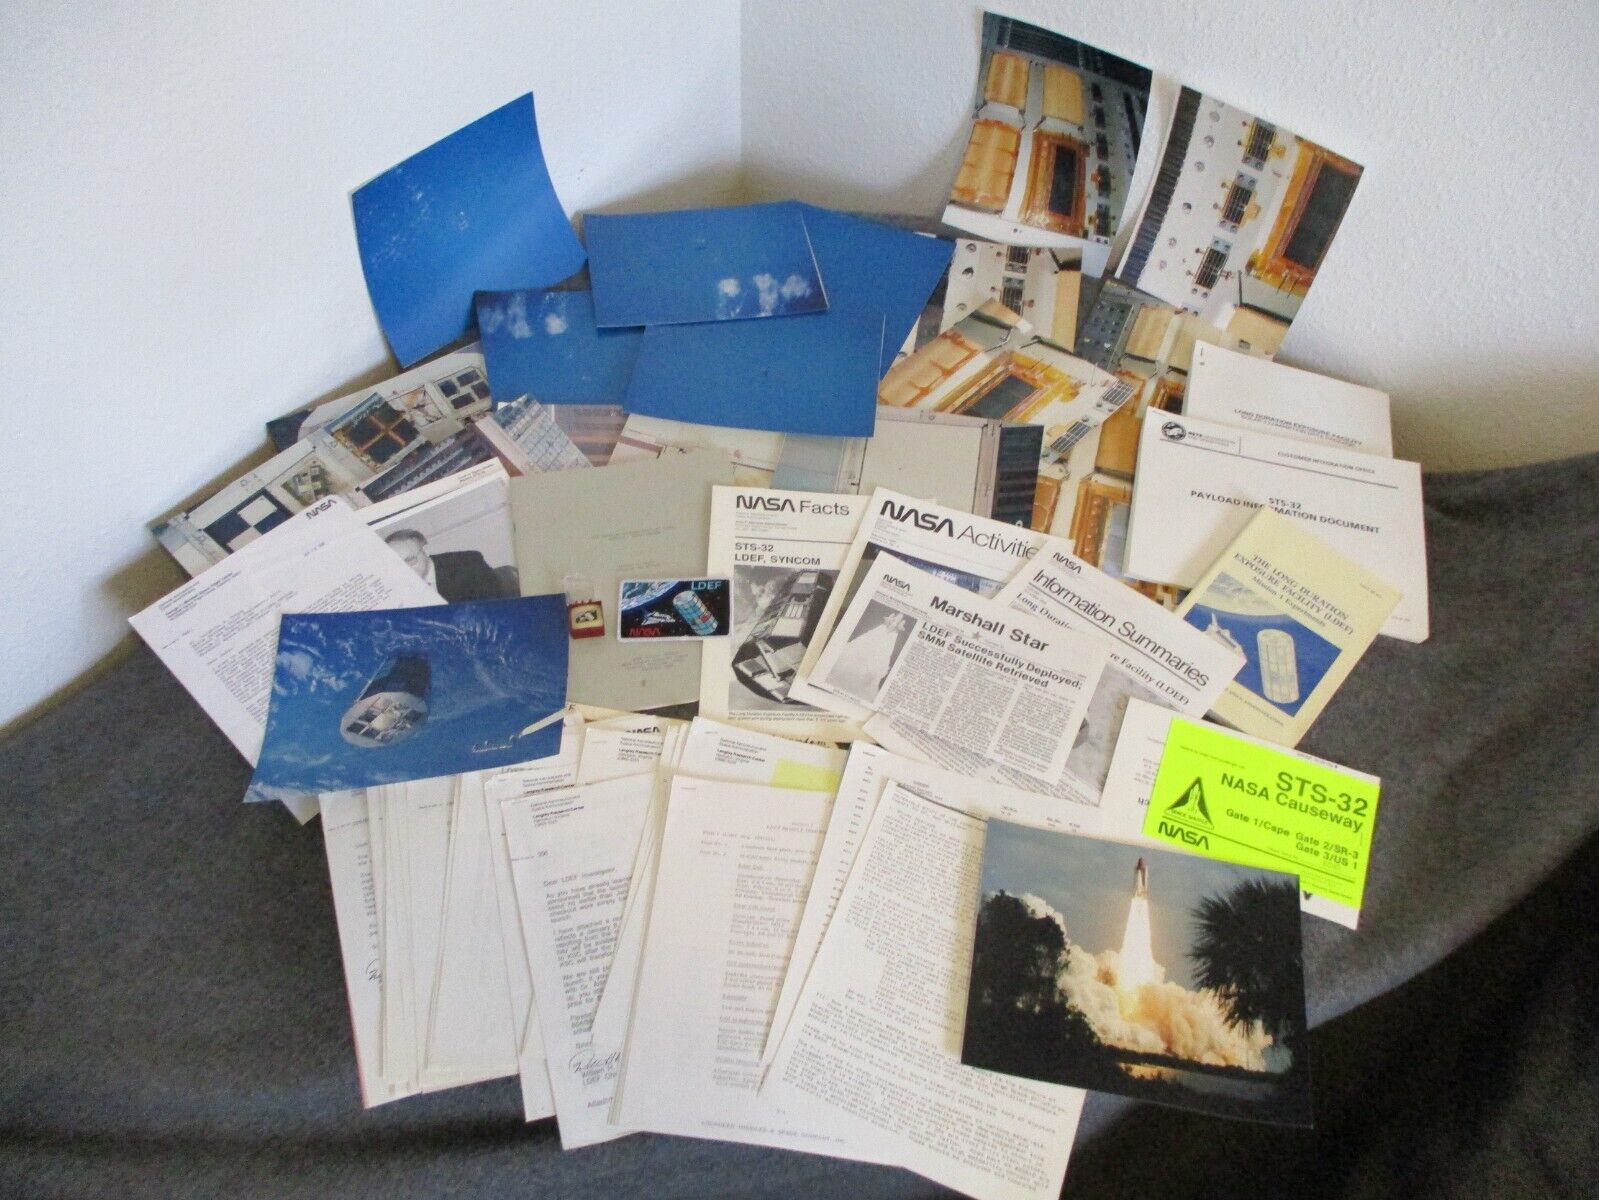 1984-92 NASA/MSFC SPACE SHUTTLE LDEF STS-32 1ST GEN PHOTOS/BOOKS/PIN/PATCH+++